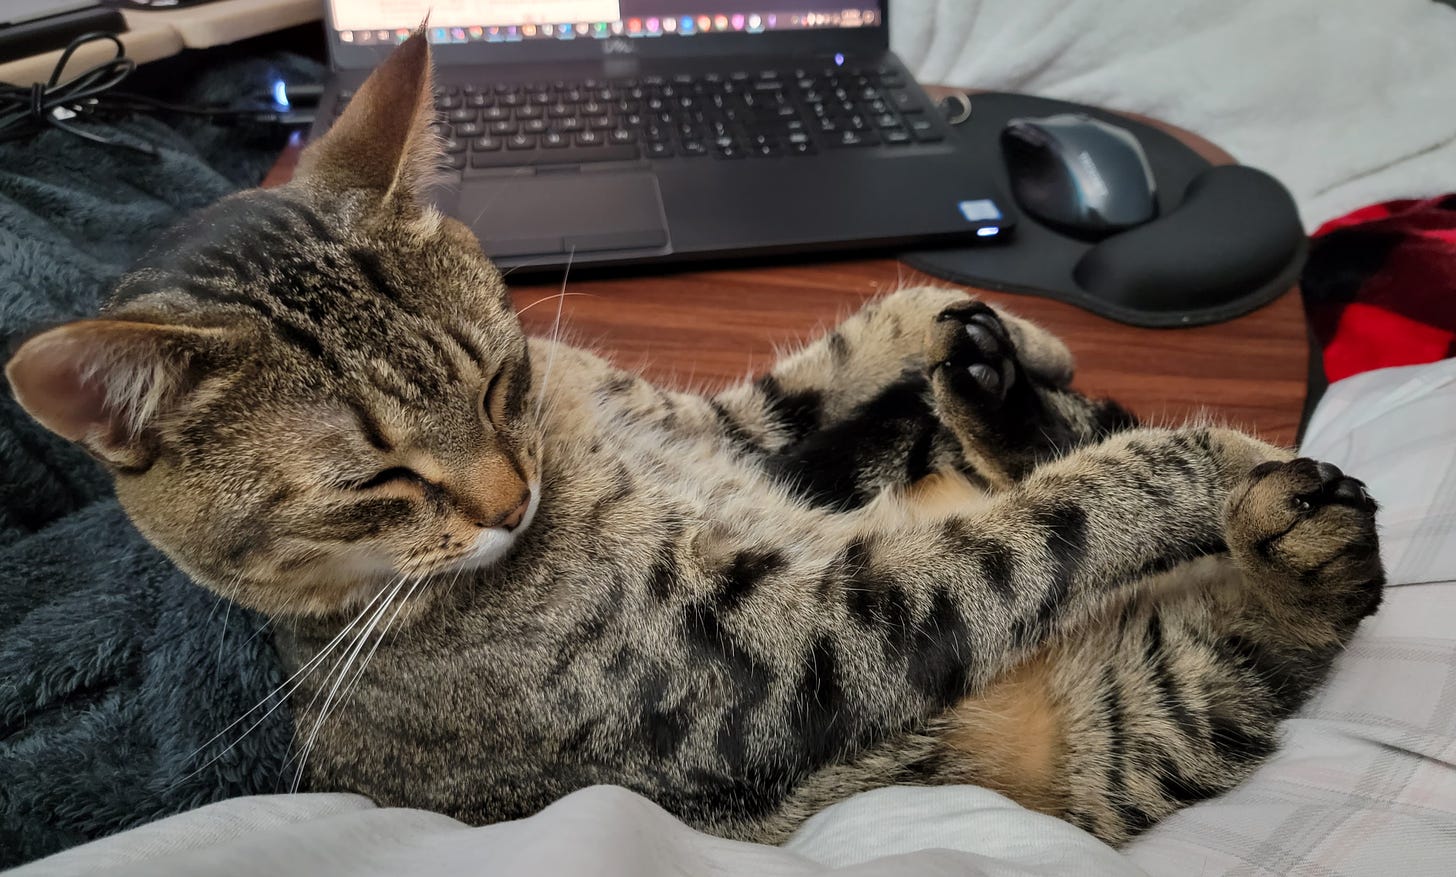 A tabby cat sitting on its back holding its back legs with its front paws. There is a wood lap desk with a laptop in the background and blankets all around.